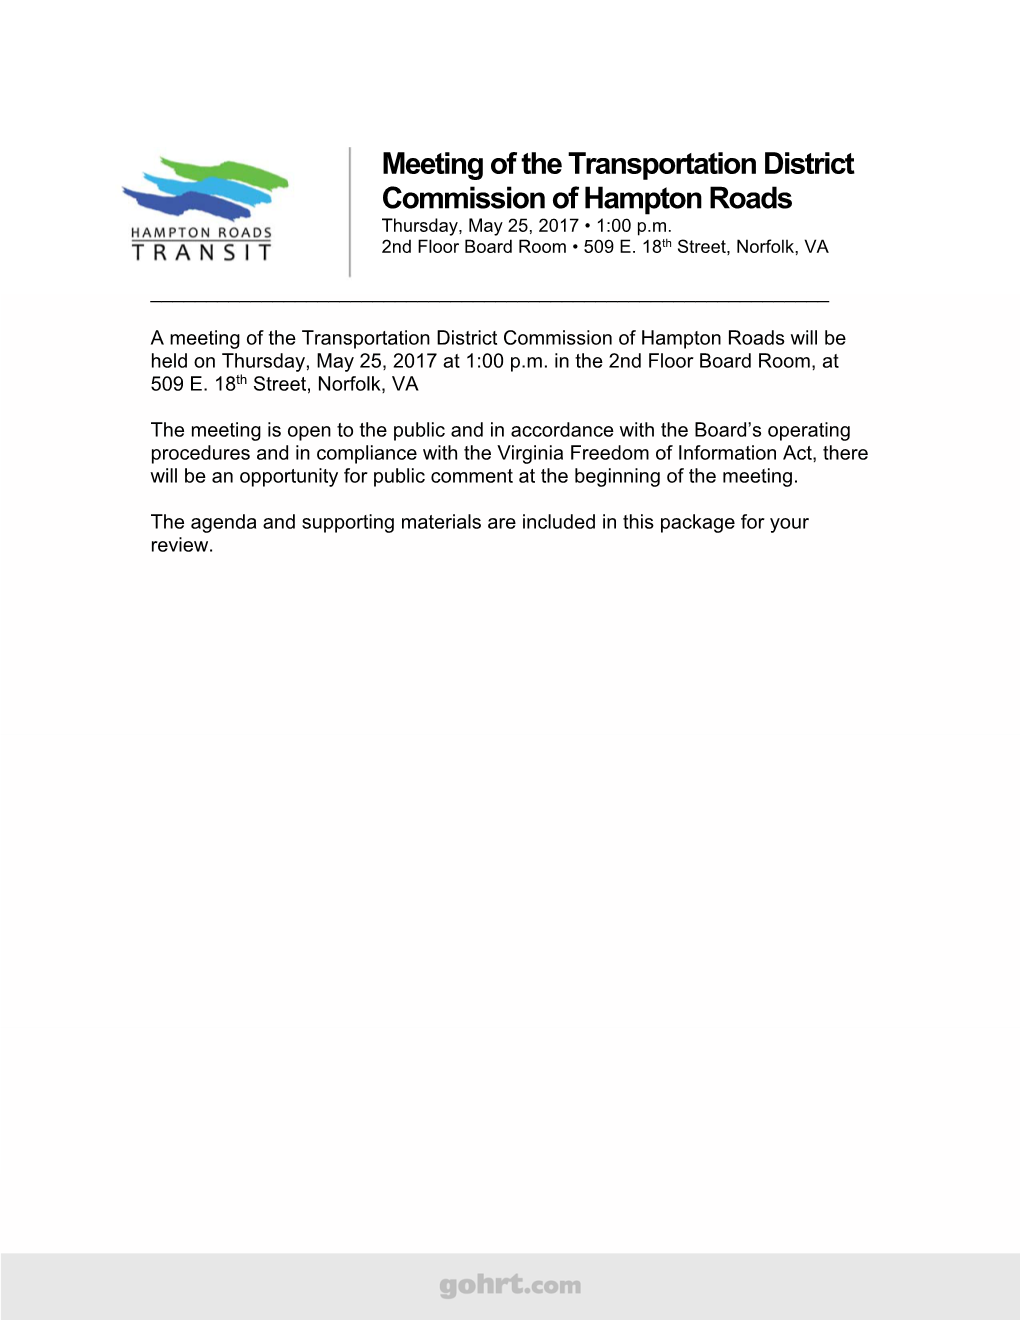 Meeting of the Transportation District Commission of Hampton Roads Thursday, May 25, 2017 • 1:00 P.M